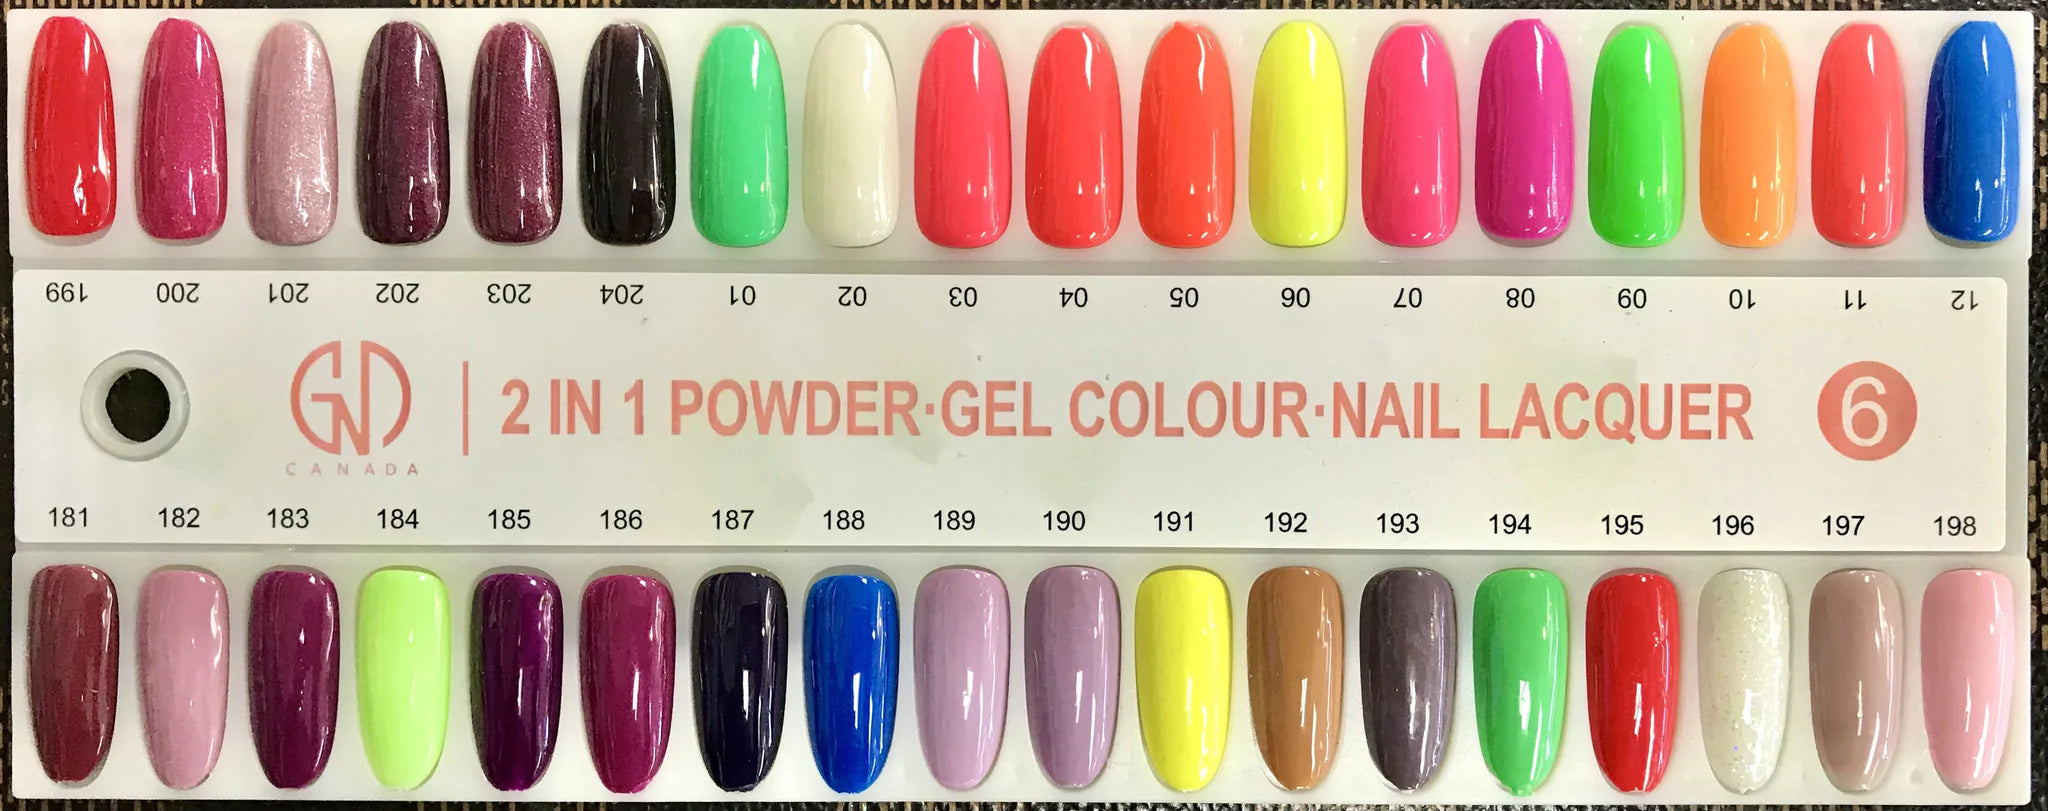 GND Duo Gel & Lacquer 193